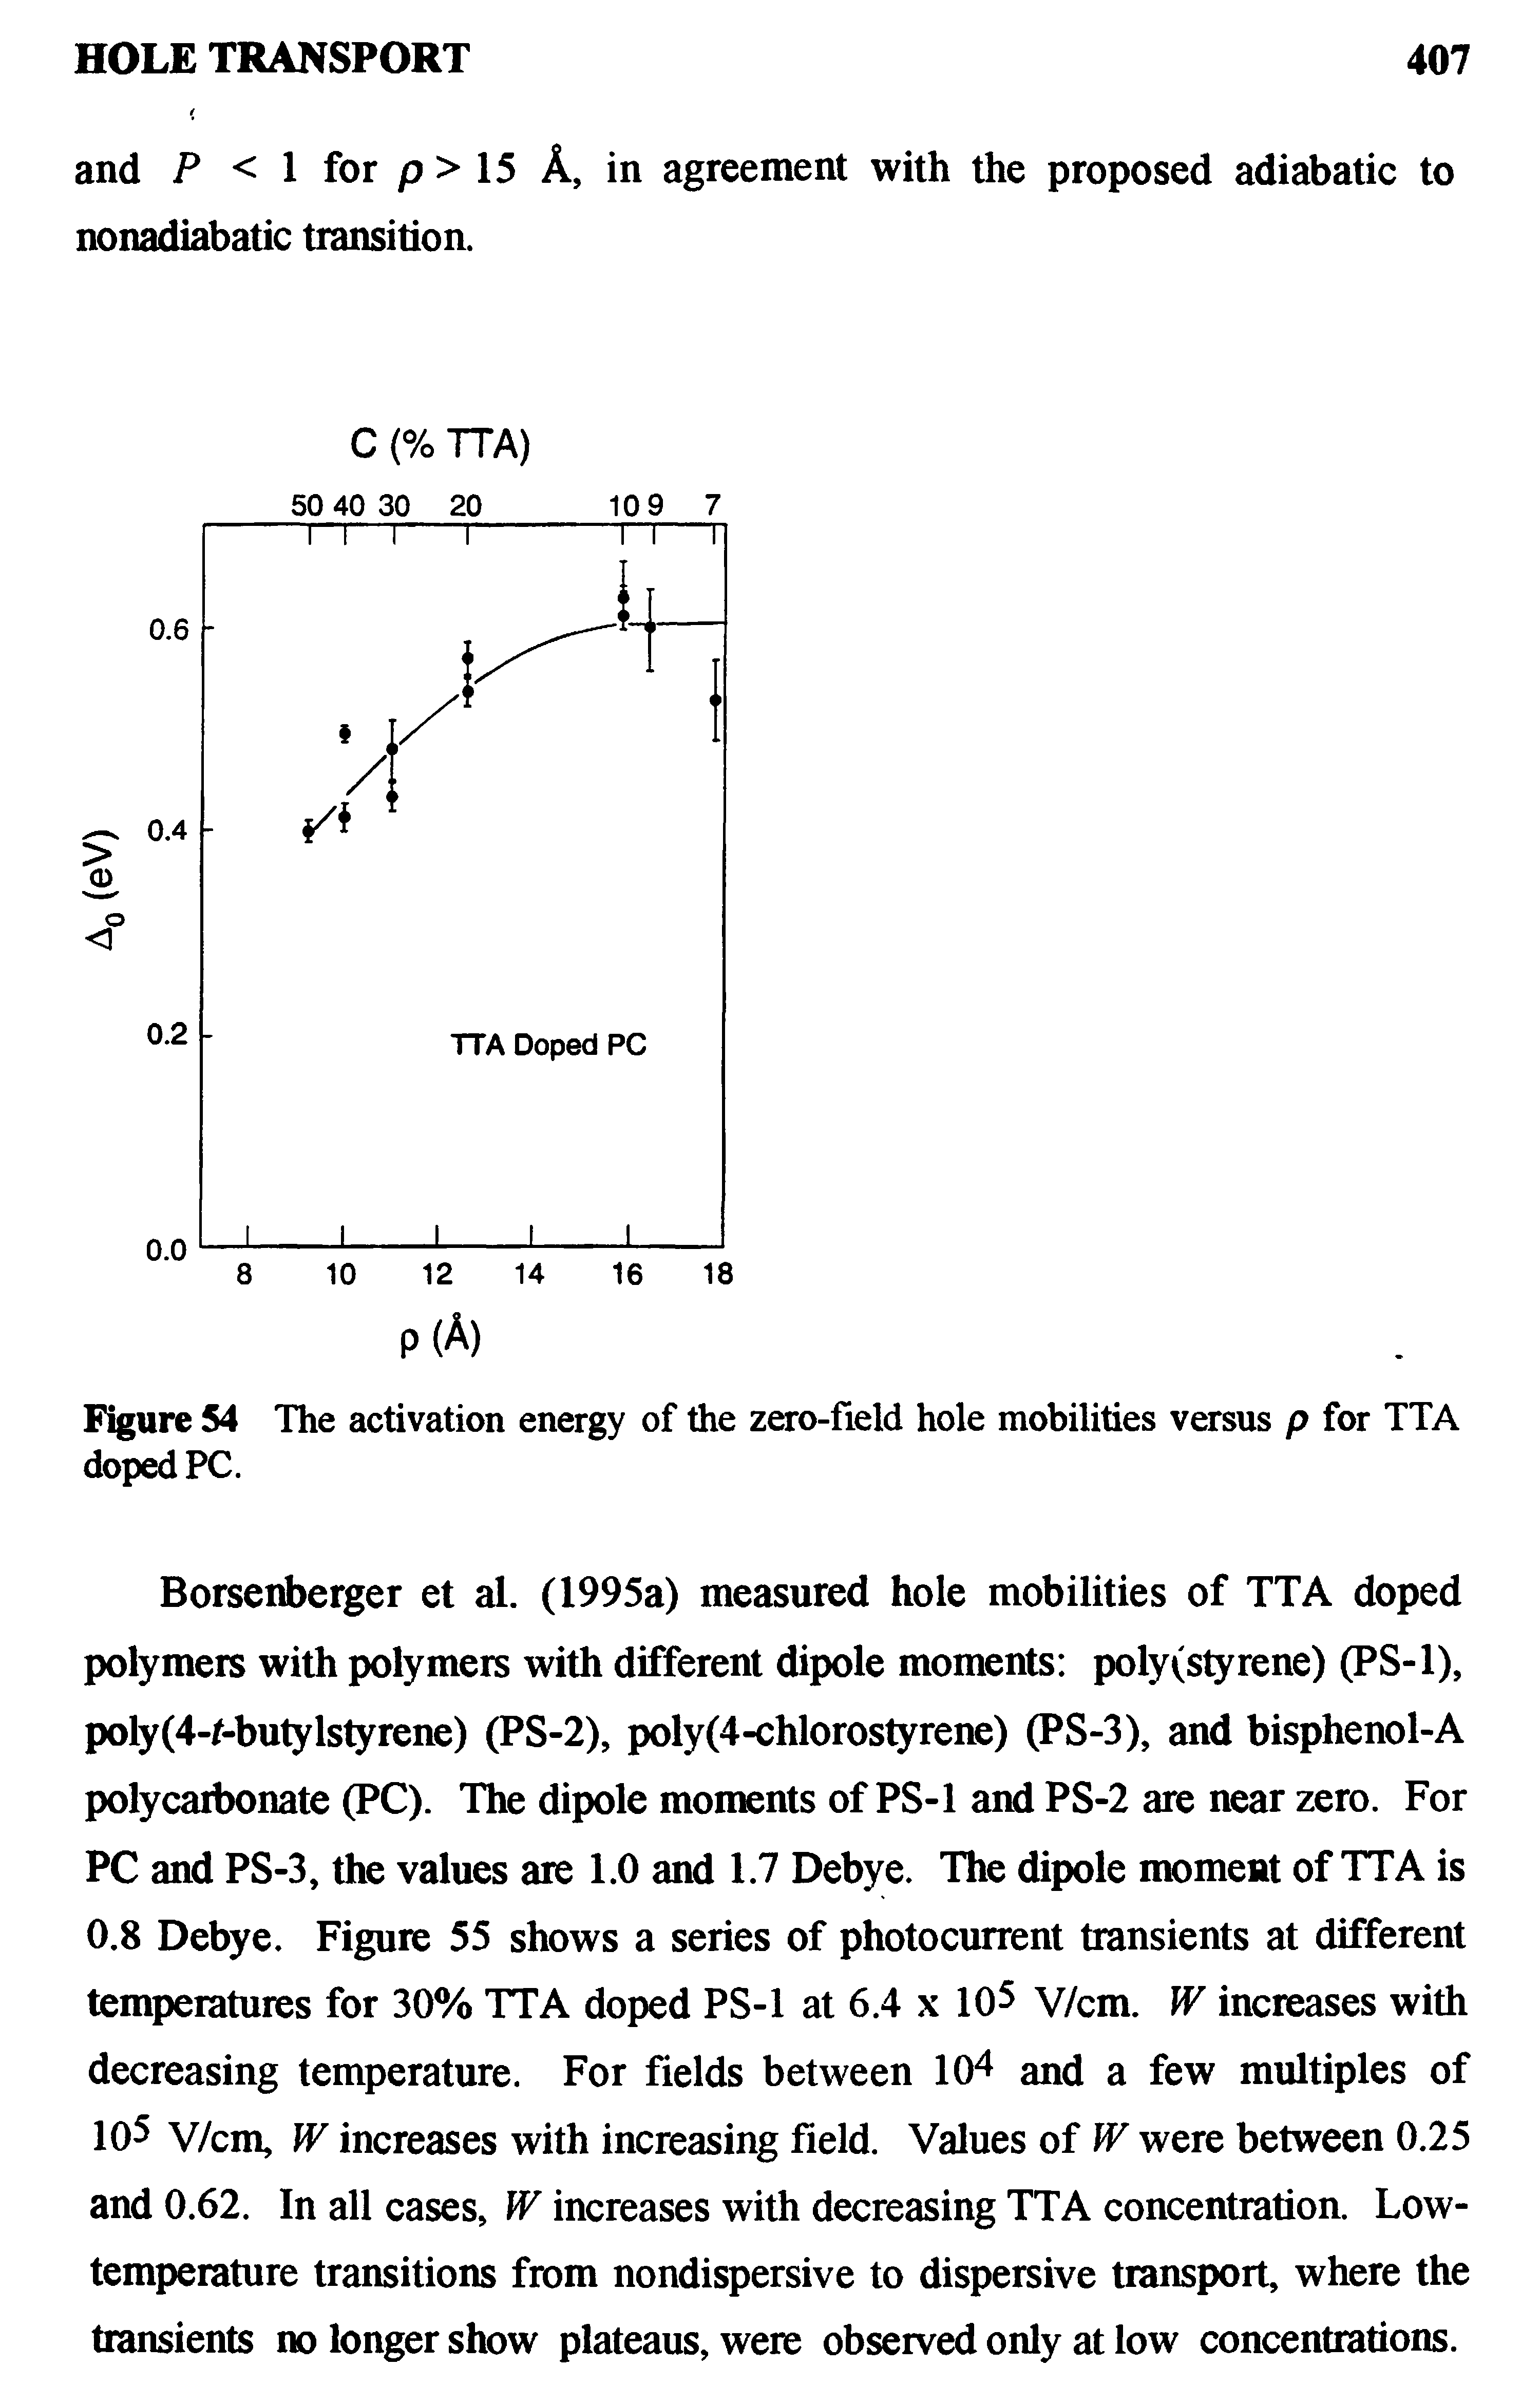 Figure 54 The activation energy of the zero-field hole mobilities versus p for TTA doped PC.